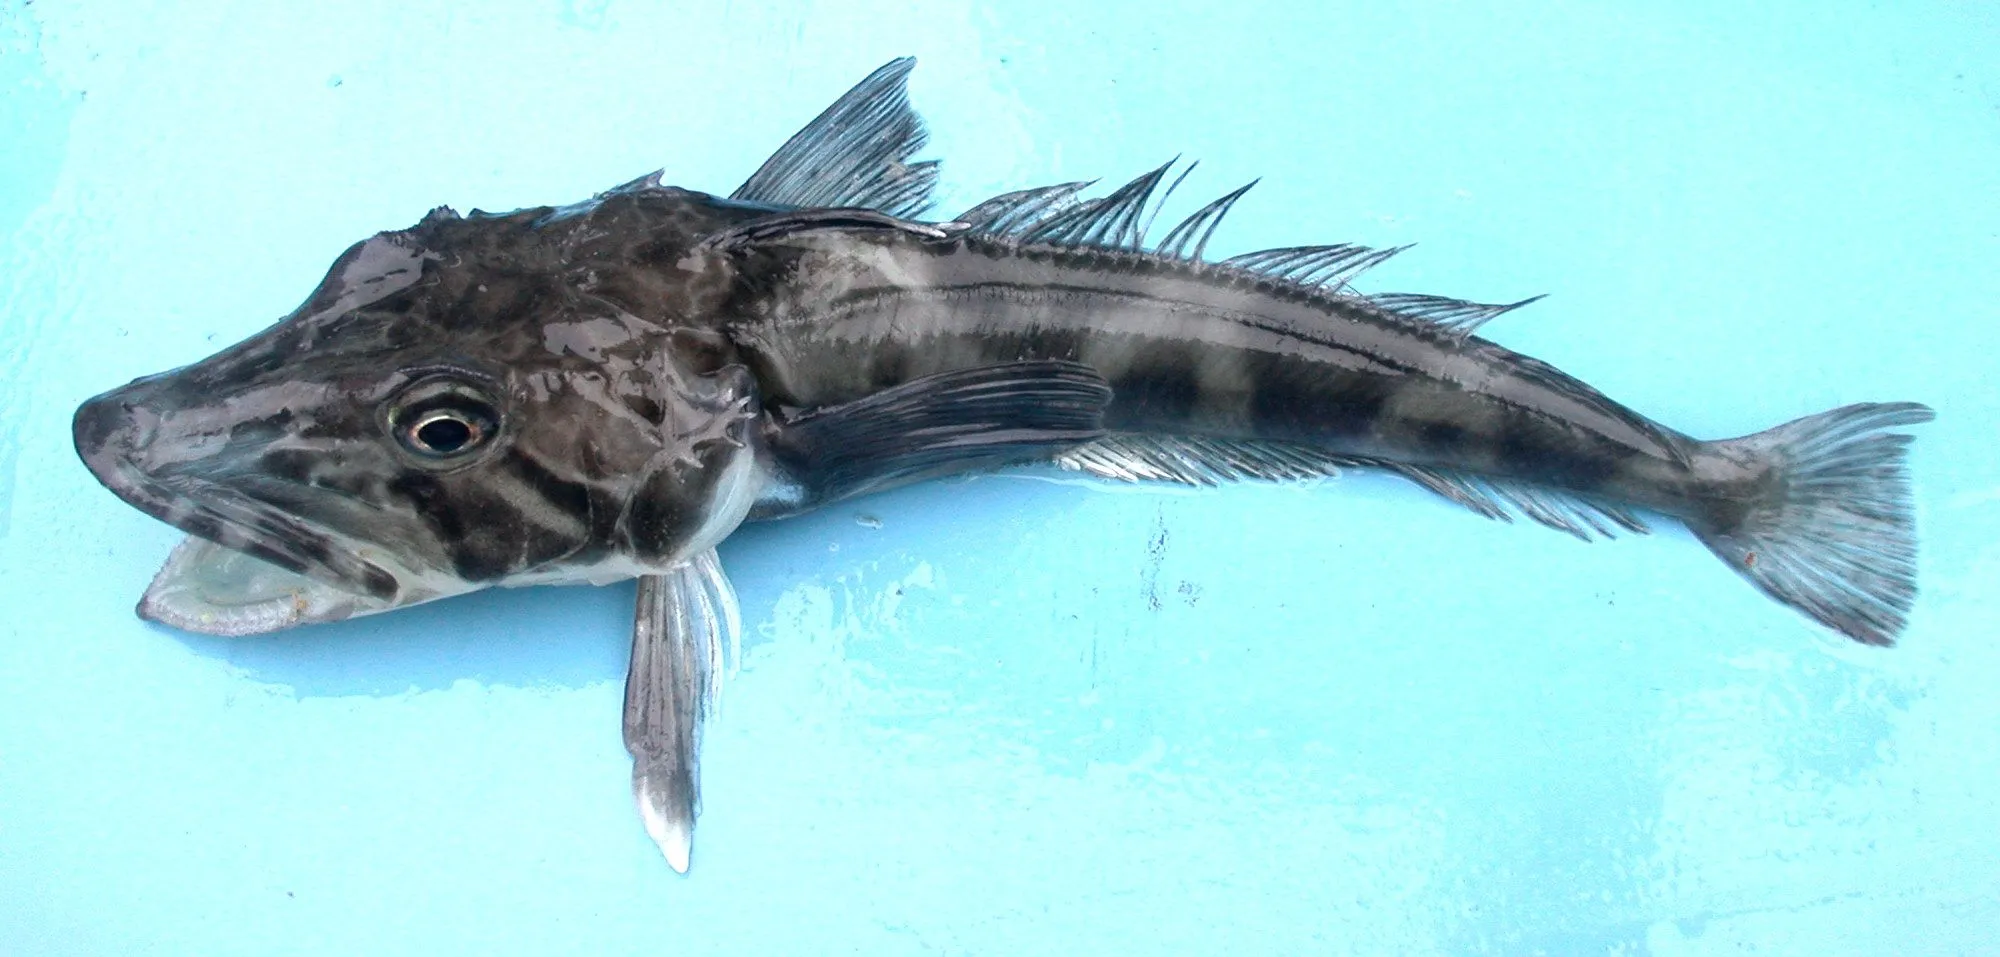 Crocodile icefish belongs to the Channichthyidae family.